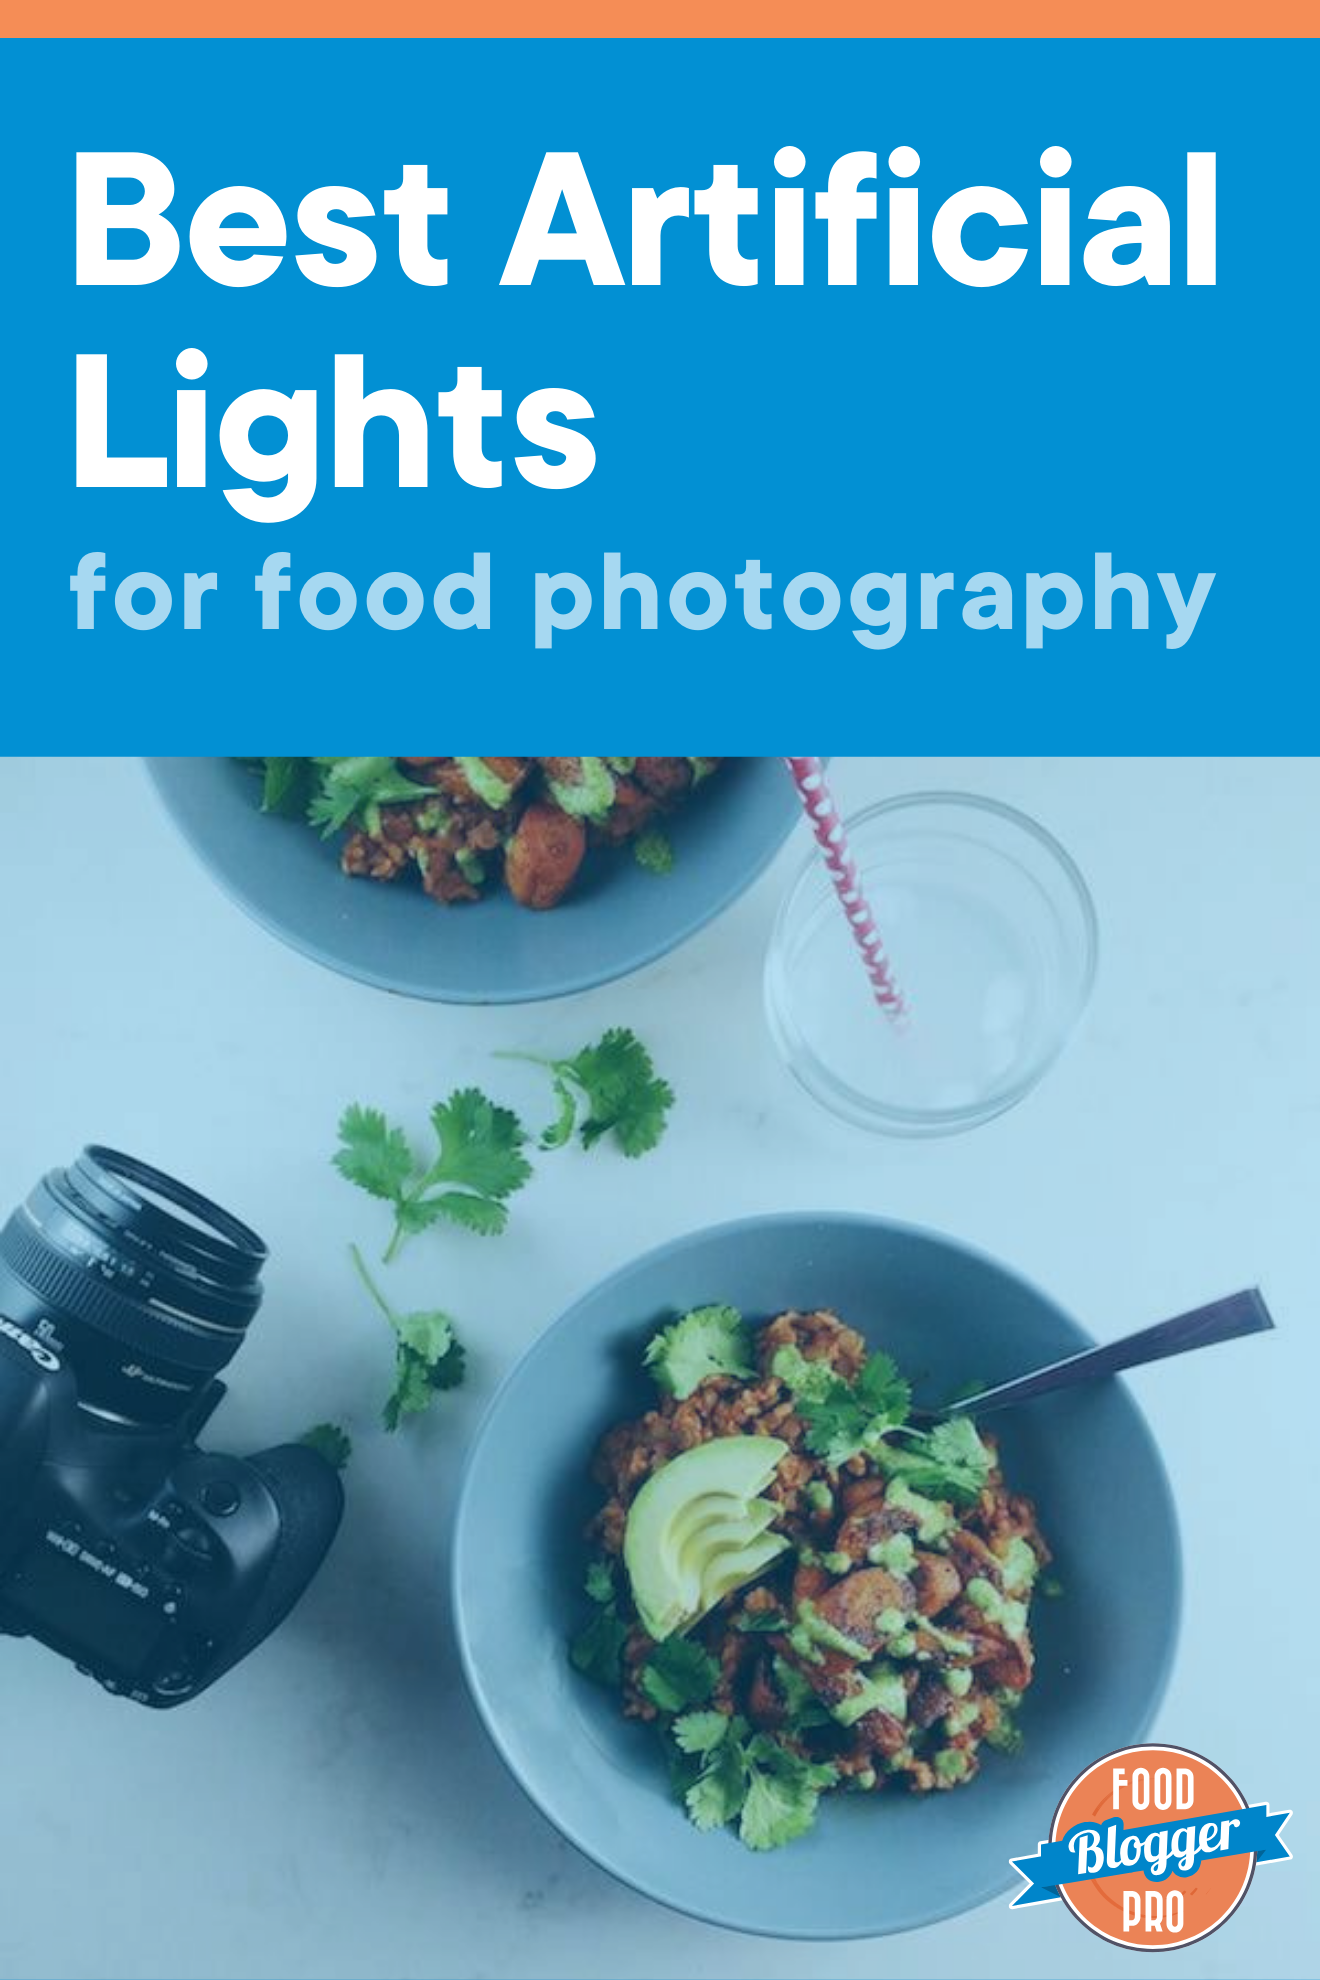 A photograph of two bowls of food with a cup of water and a Canon camera with the title of the blog post ('Best Artificial Lights for Food Photography') across the top.